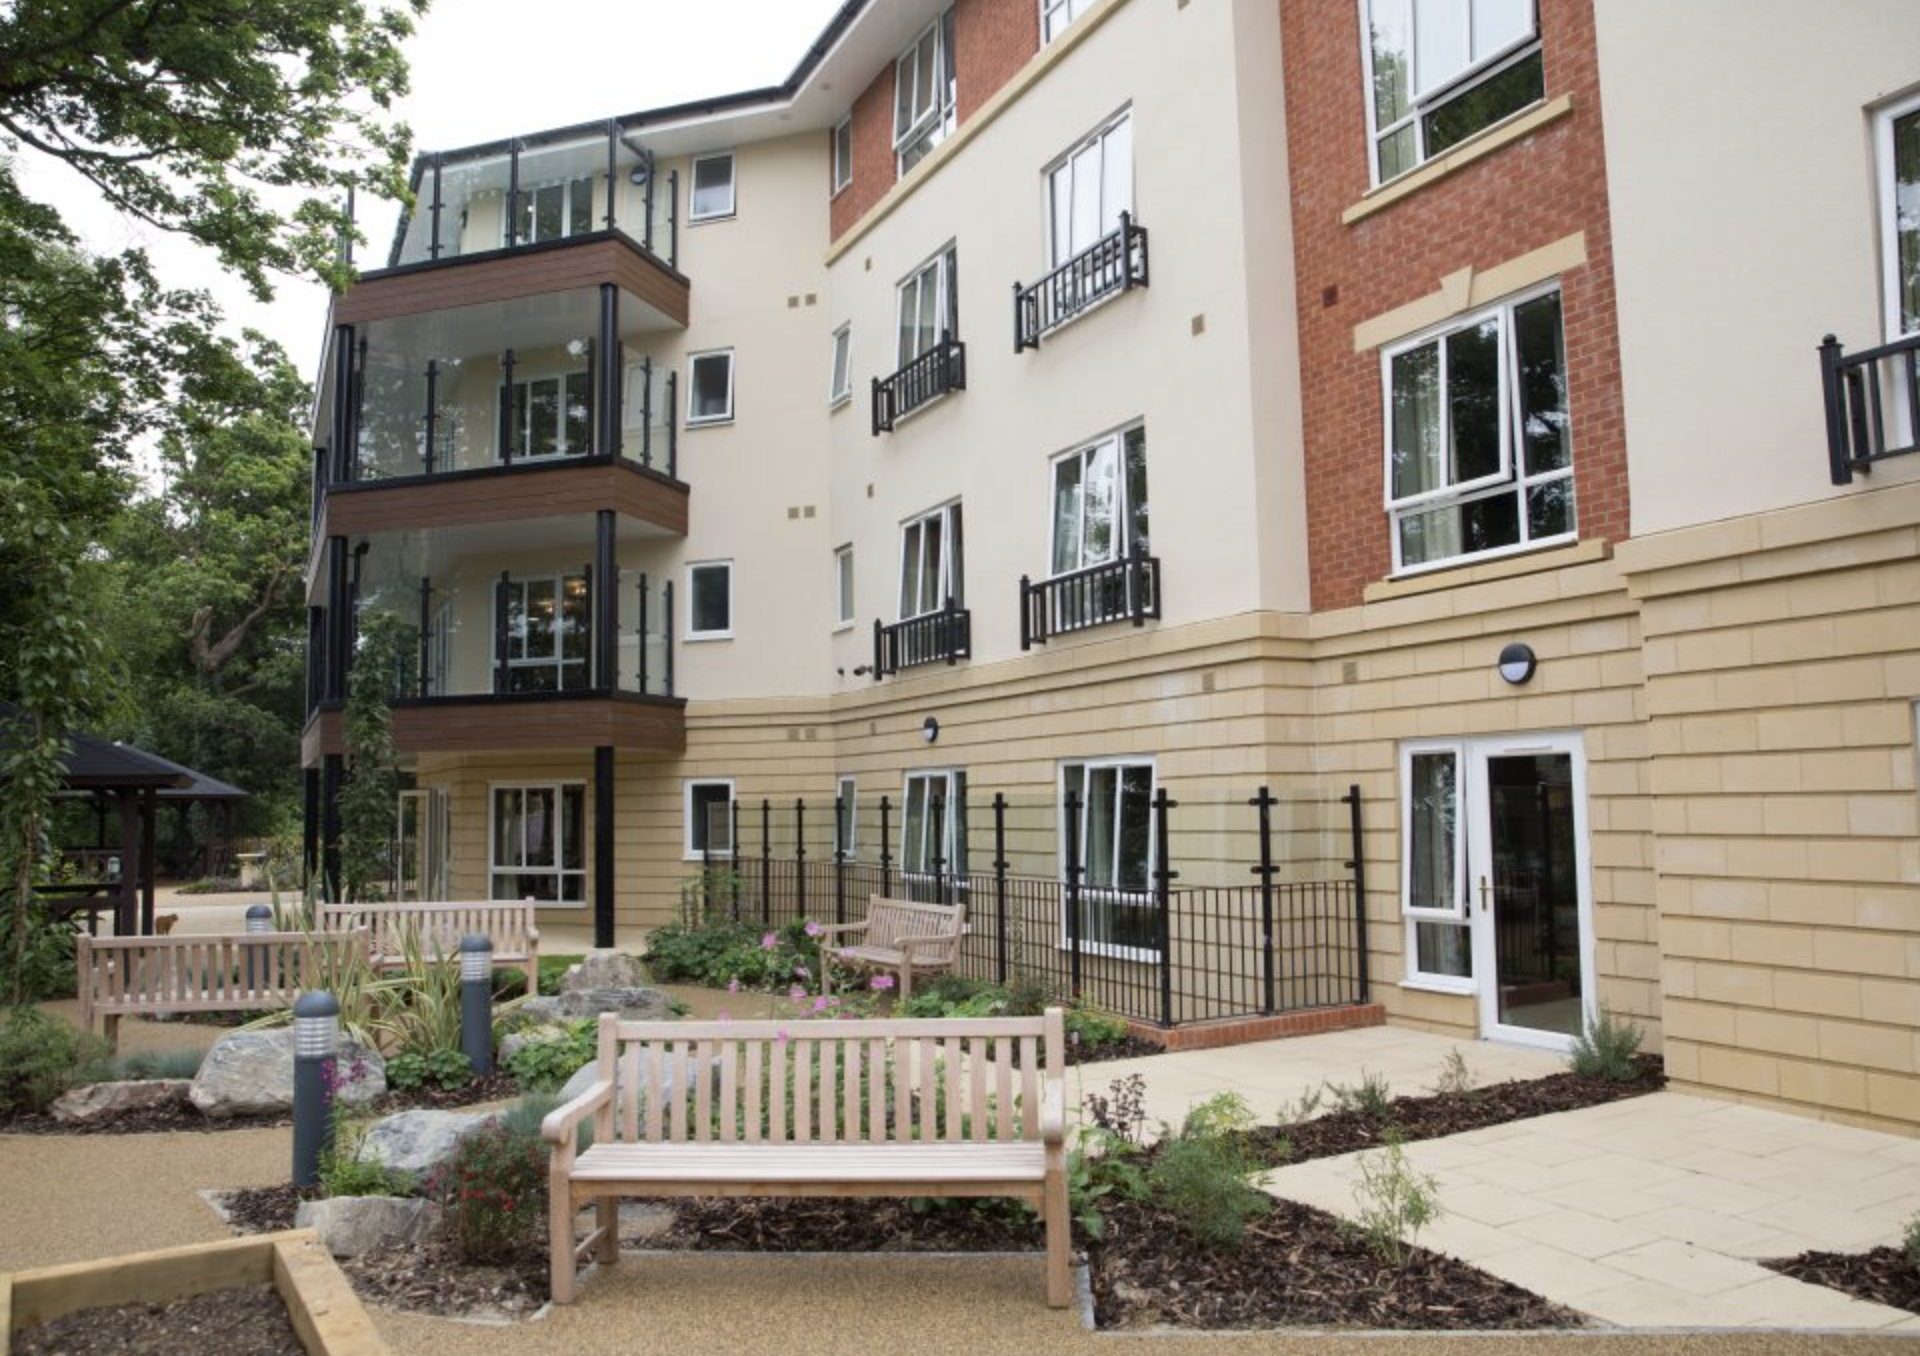 Exterior of Cuffley Manor care home in Potters Bar, Hertfordshire